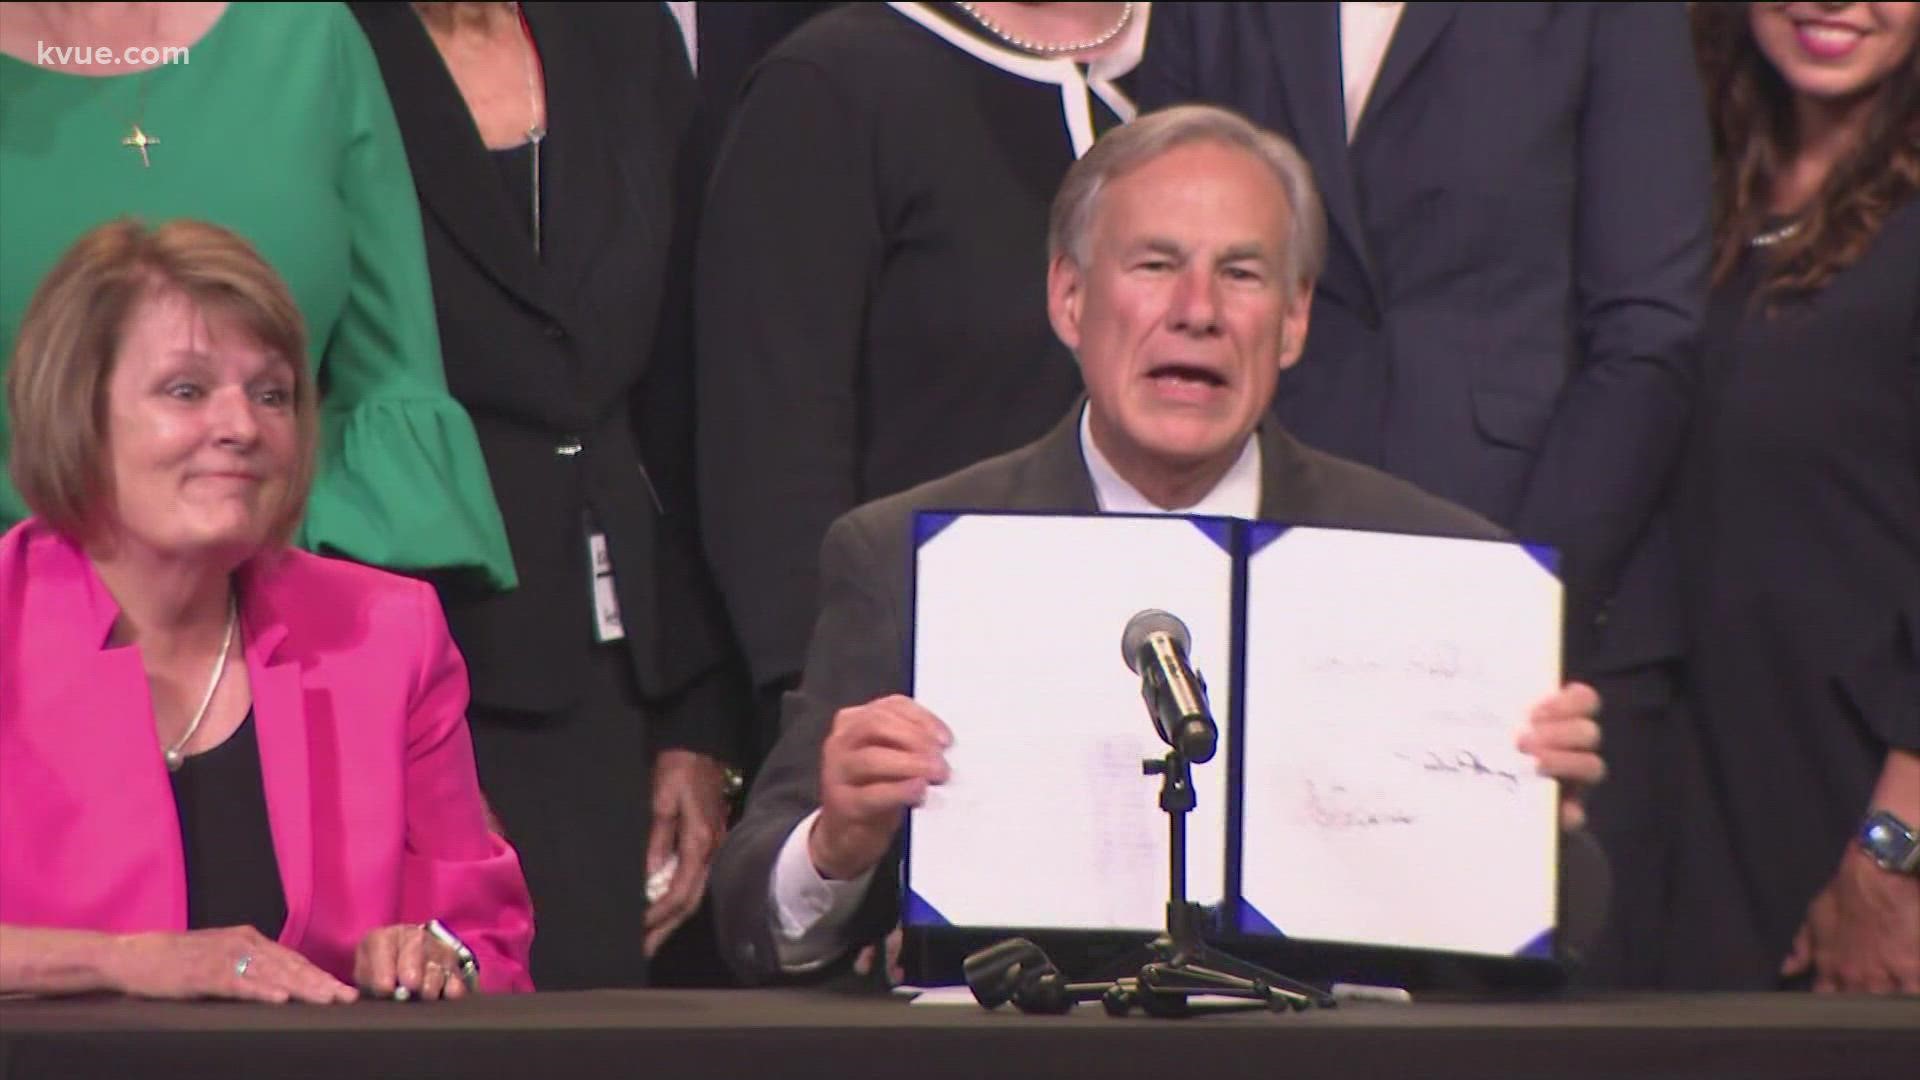 The governor held another bill signing ceremony on Friday at a Texas Values event.